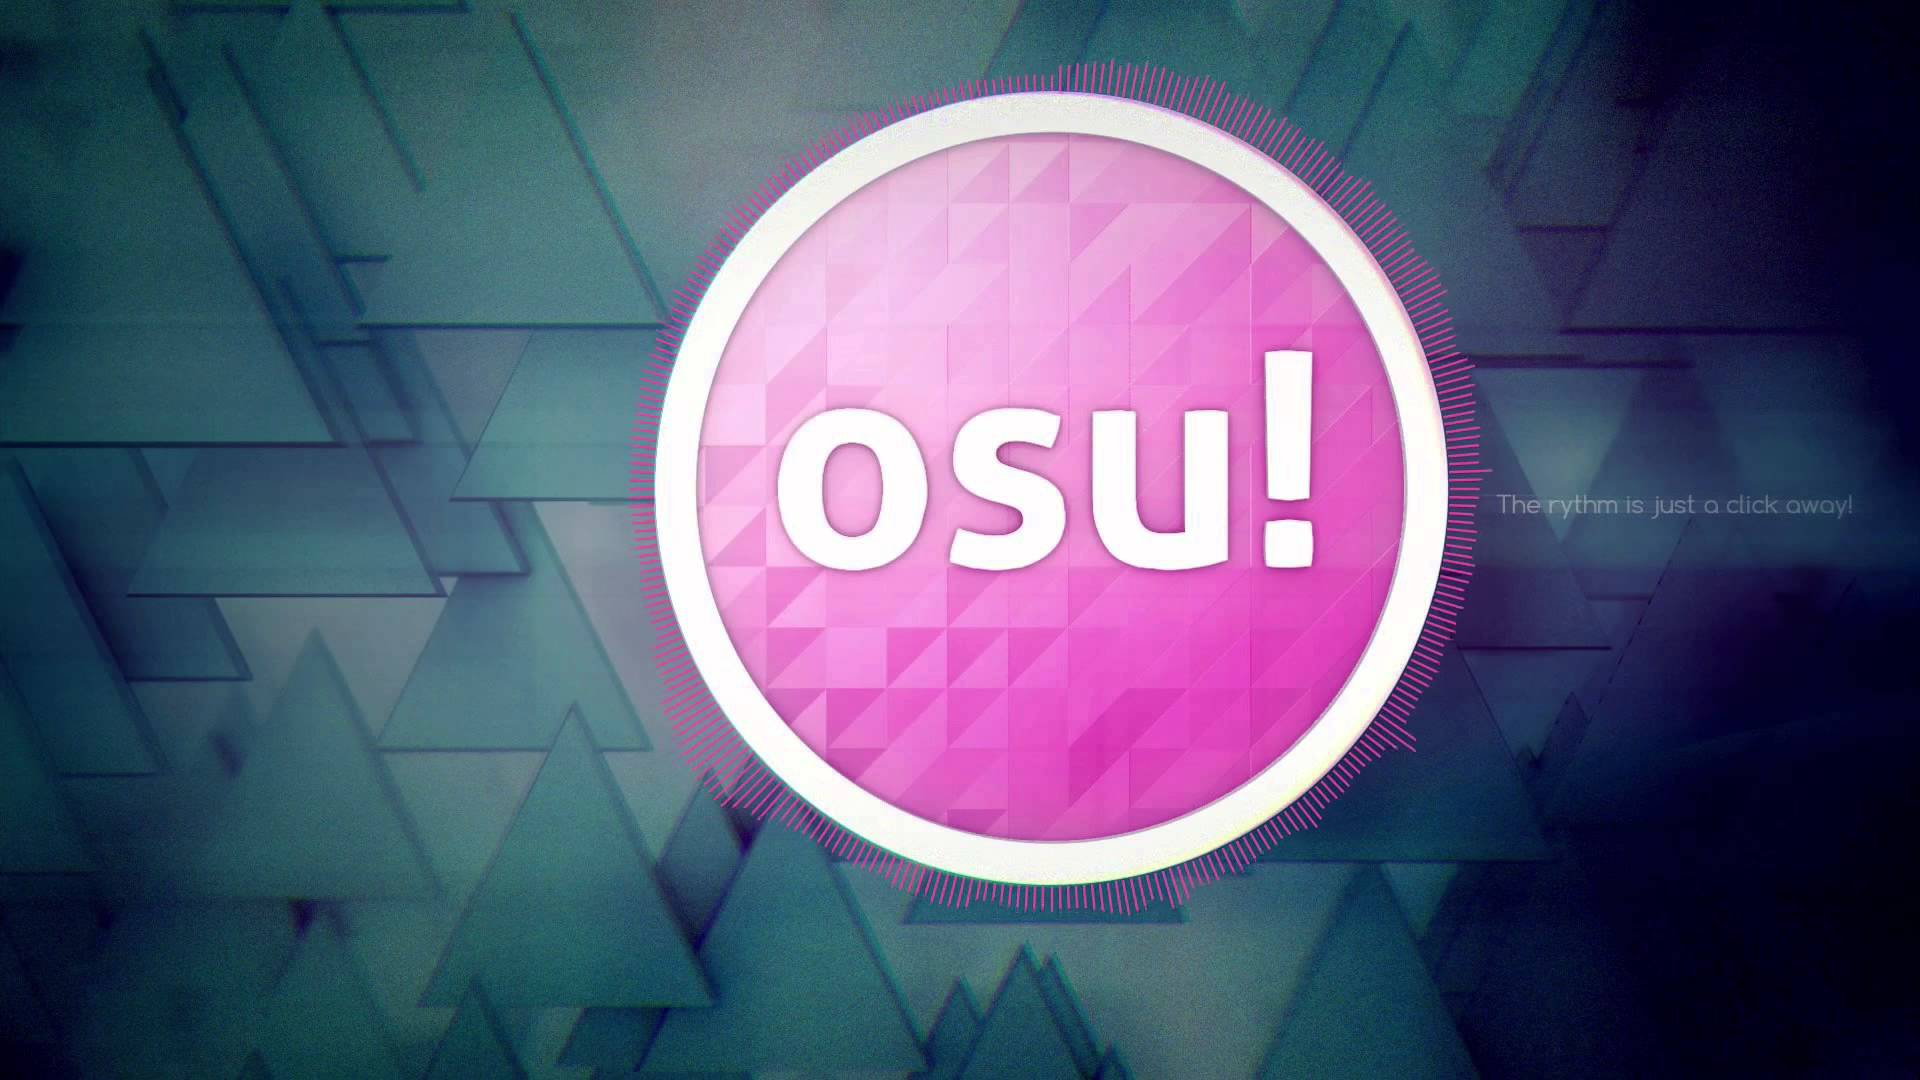 Osu! HD Wallpaper and Background Image